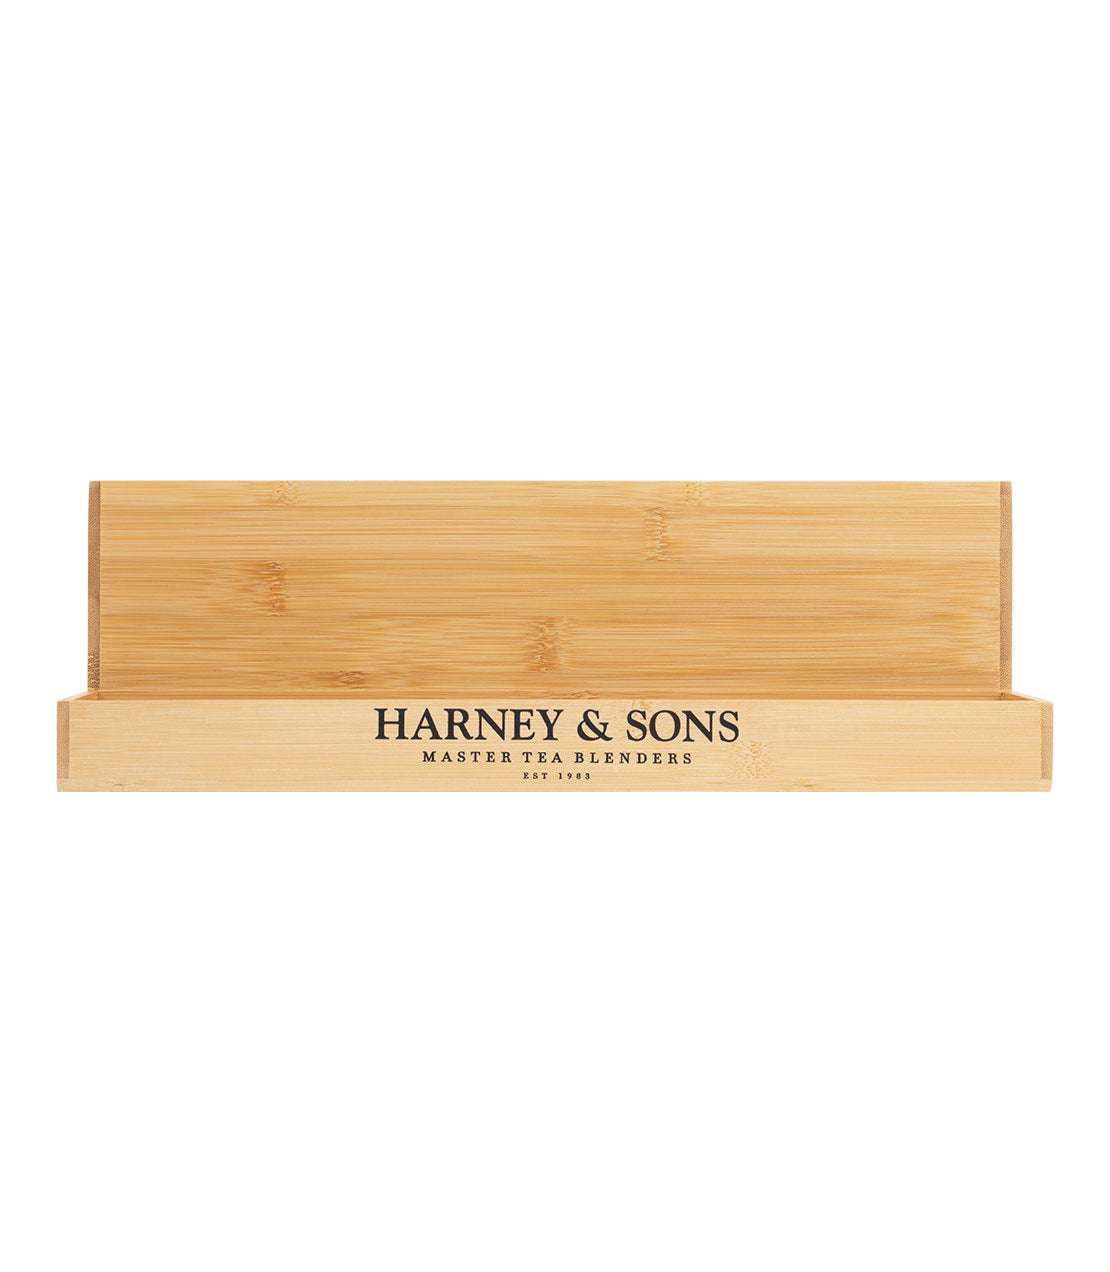 Harney & Sons Bamboo Display Rack – 8 HT, Classic or 8 oz tins